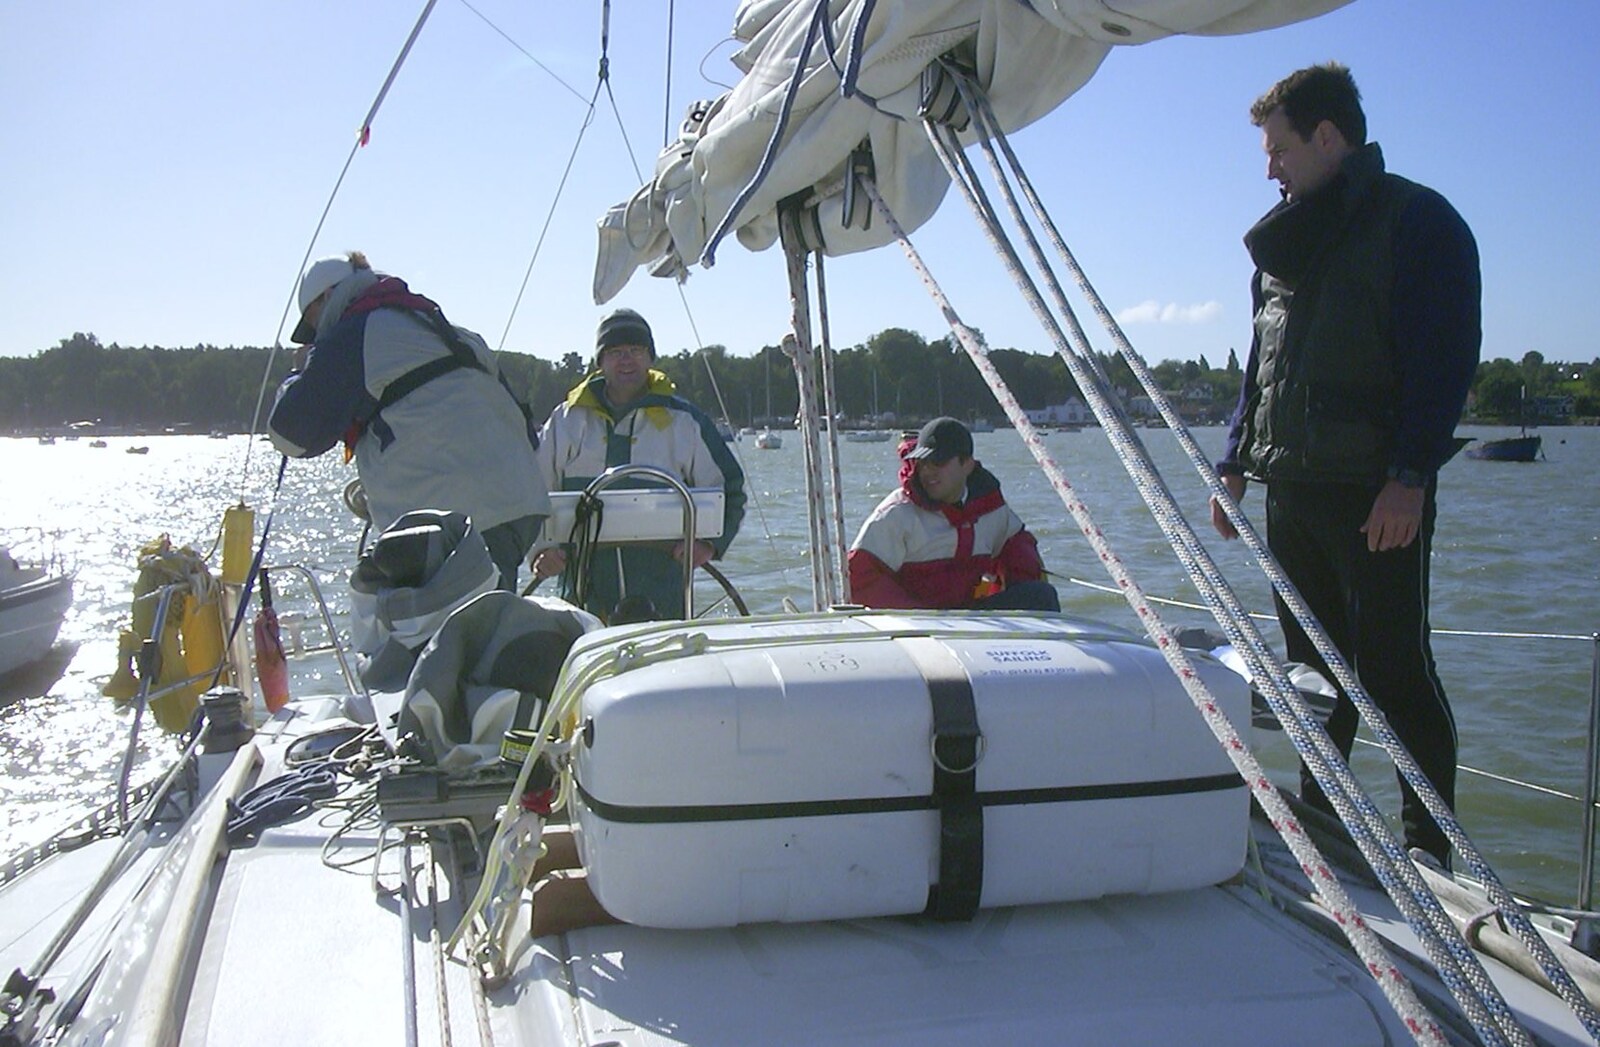 A 3G Lab Sailing Trip, Shotley, Suffolk - 6th September 2001: On the stern of the boat